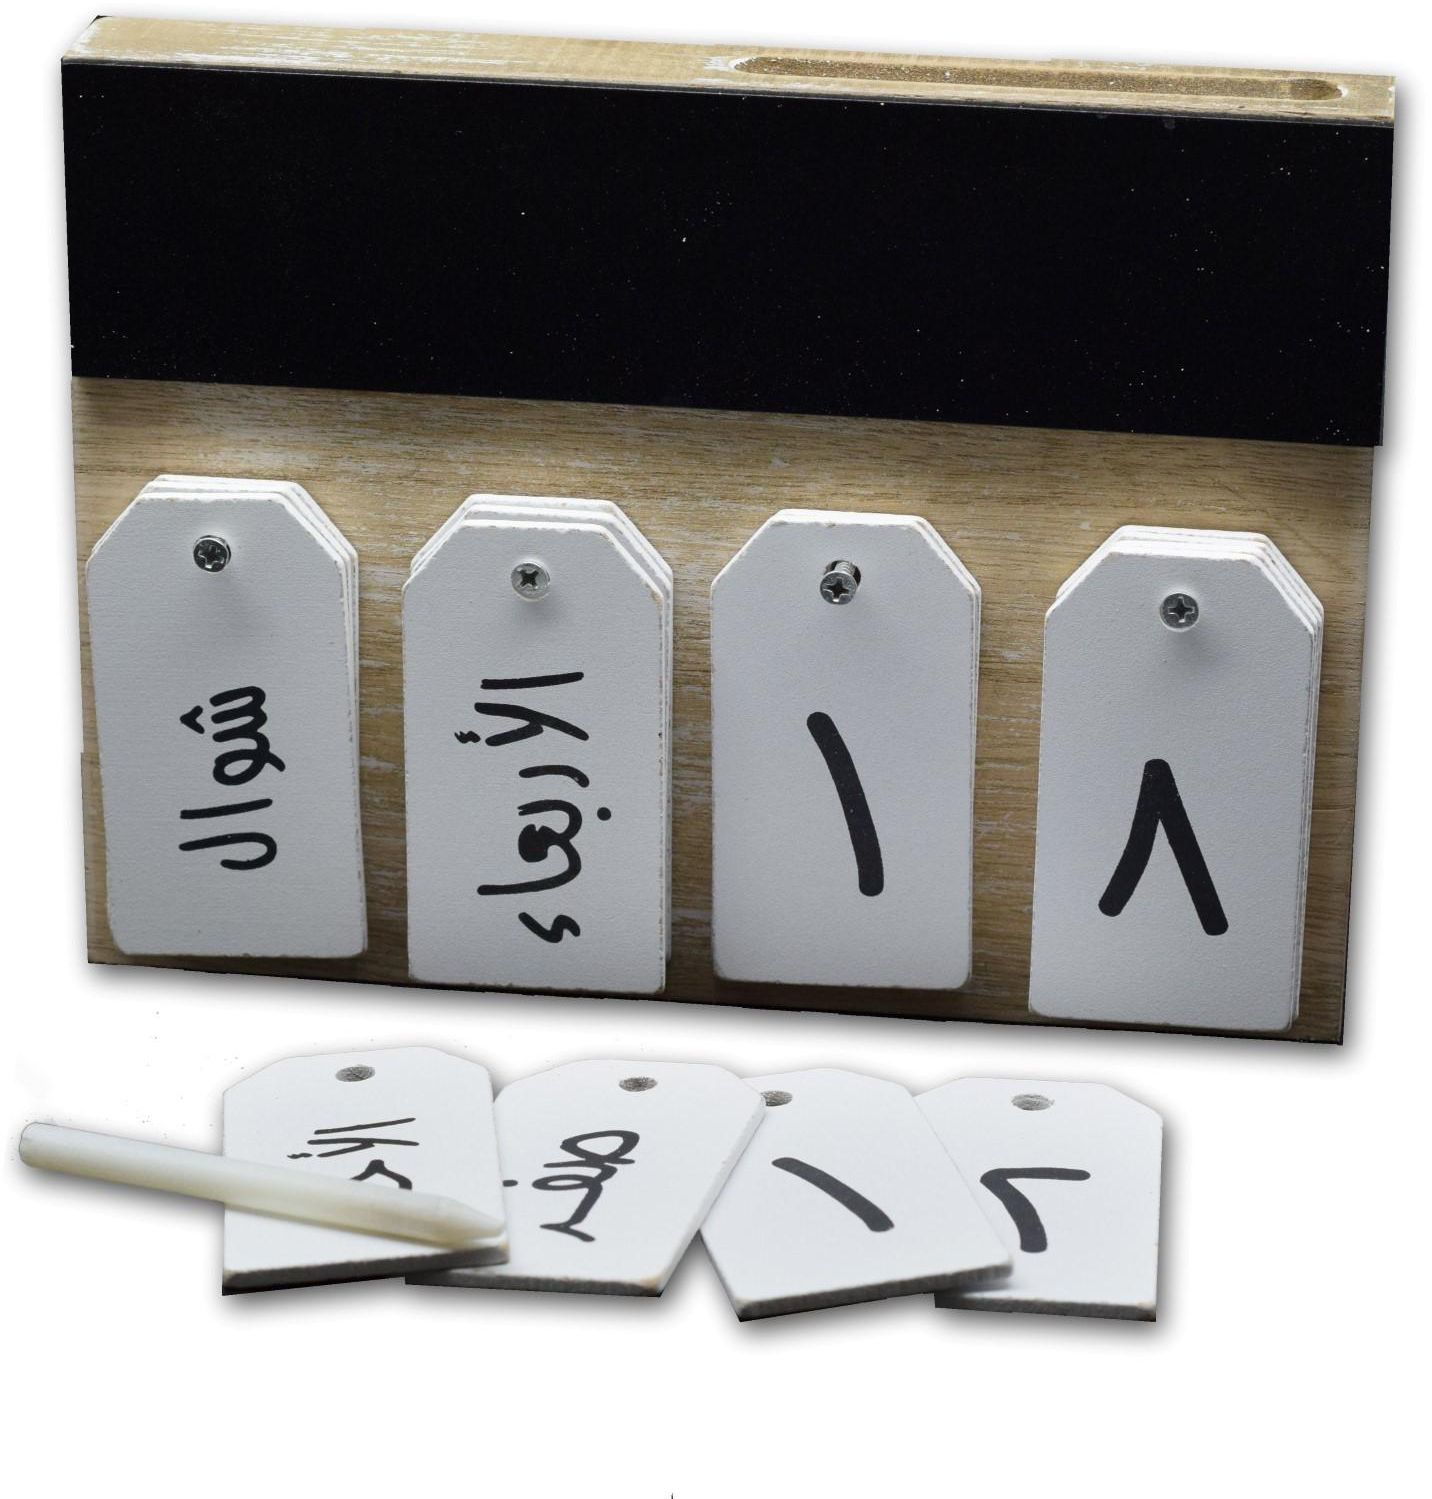 Arabic Wooden Stand Calendar with Rewritable Chalkboard and Chalk Pen